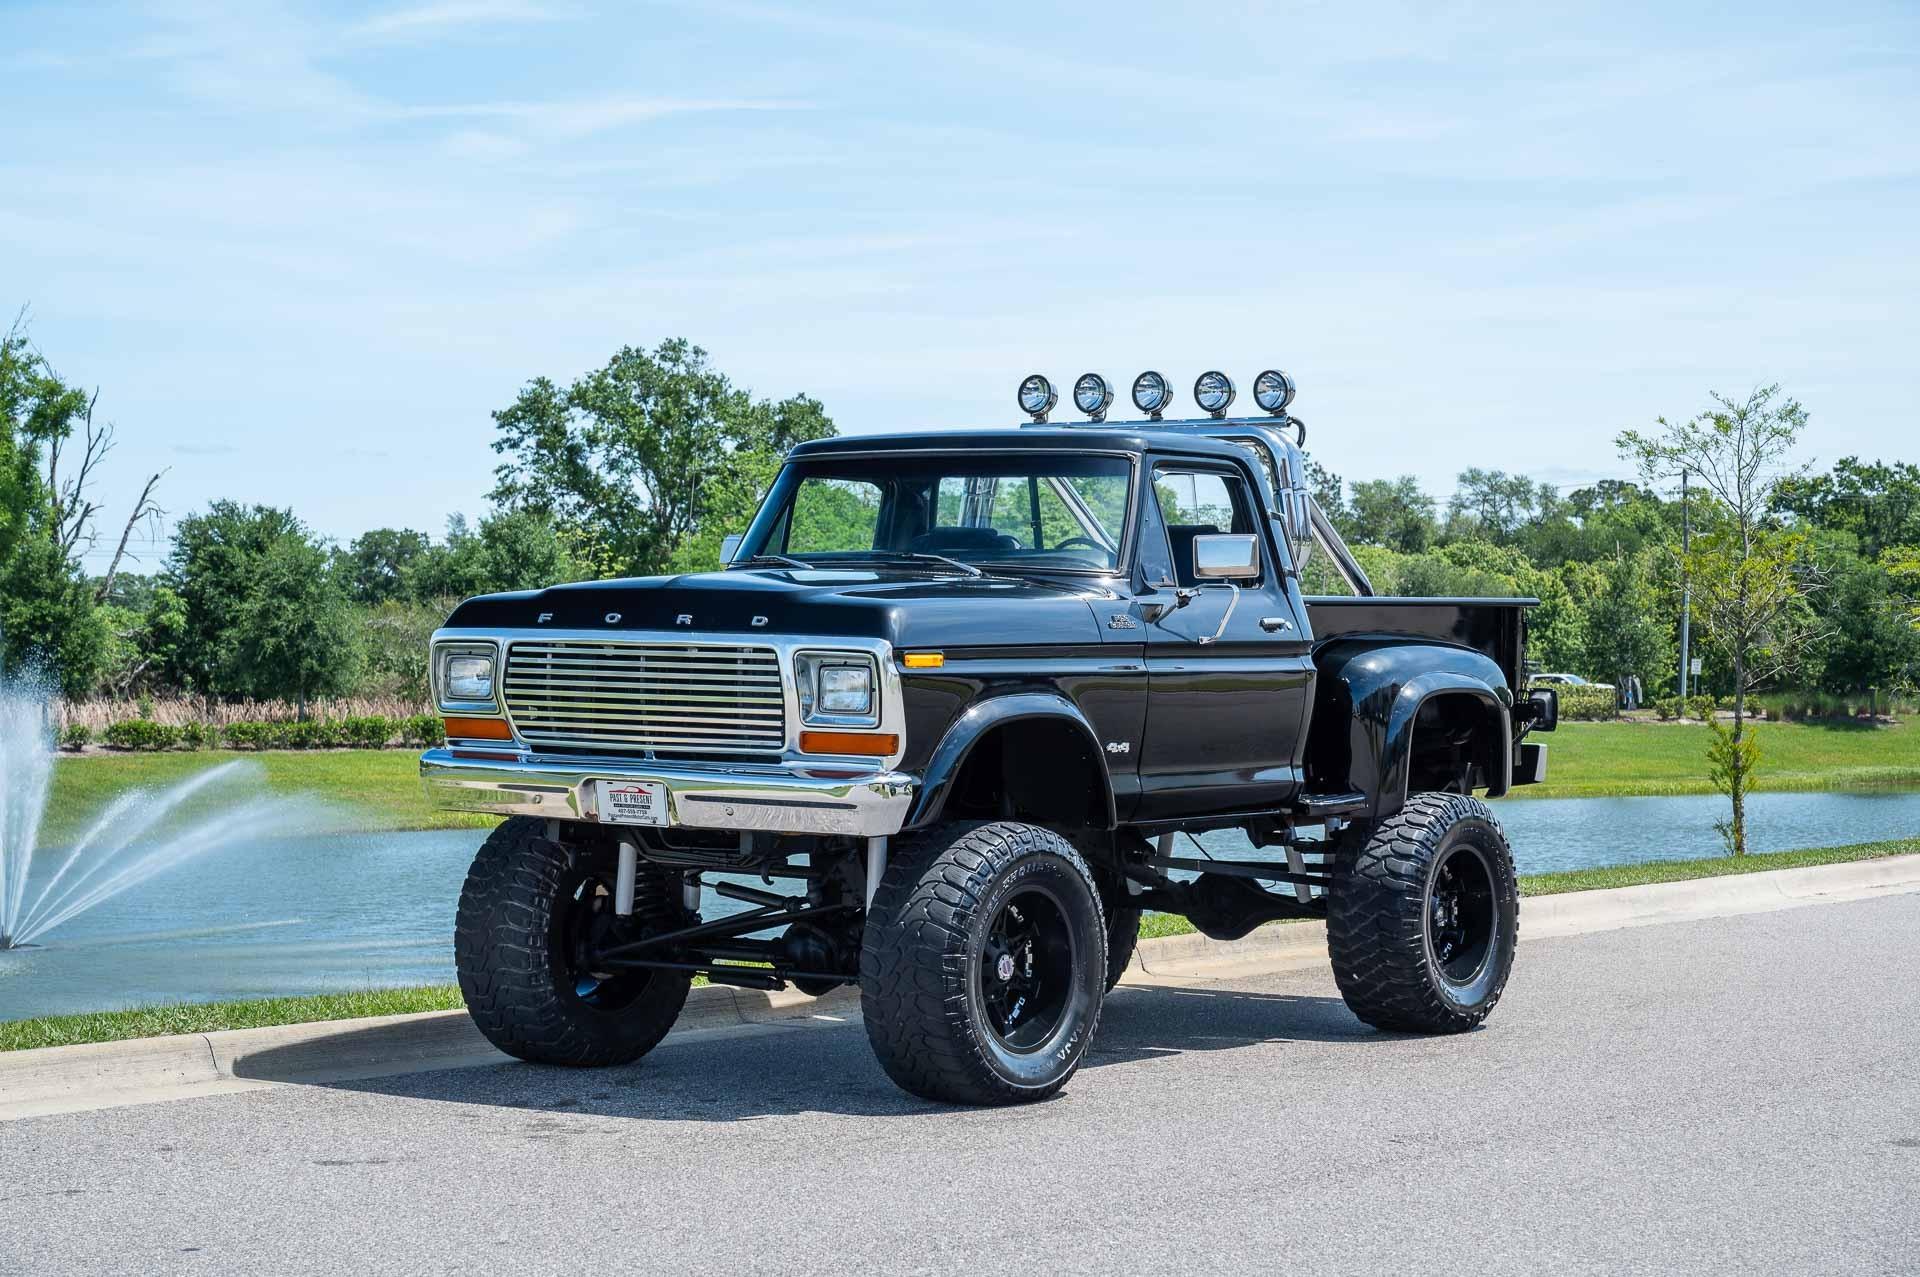 The 1979 Ford F150 Lifted Monster Truck photos